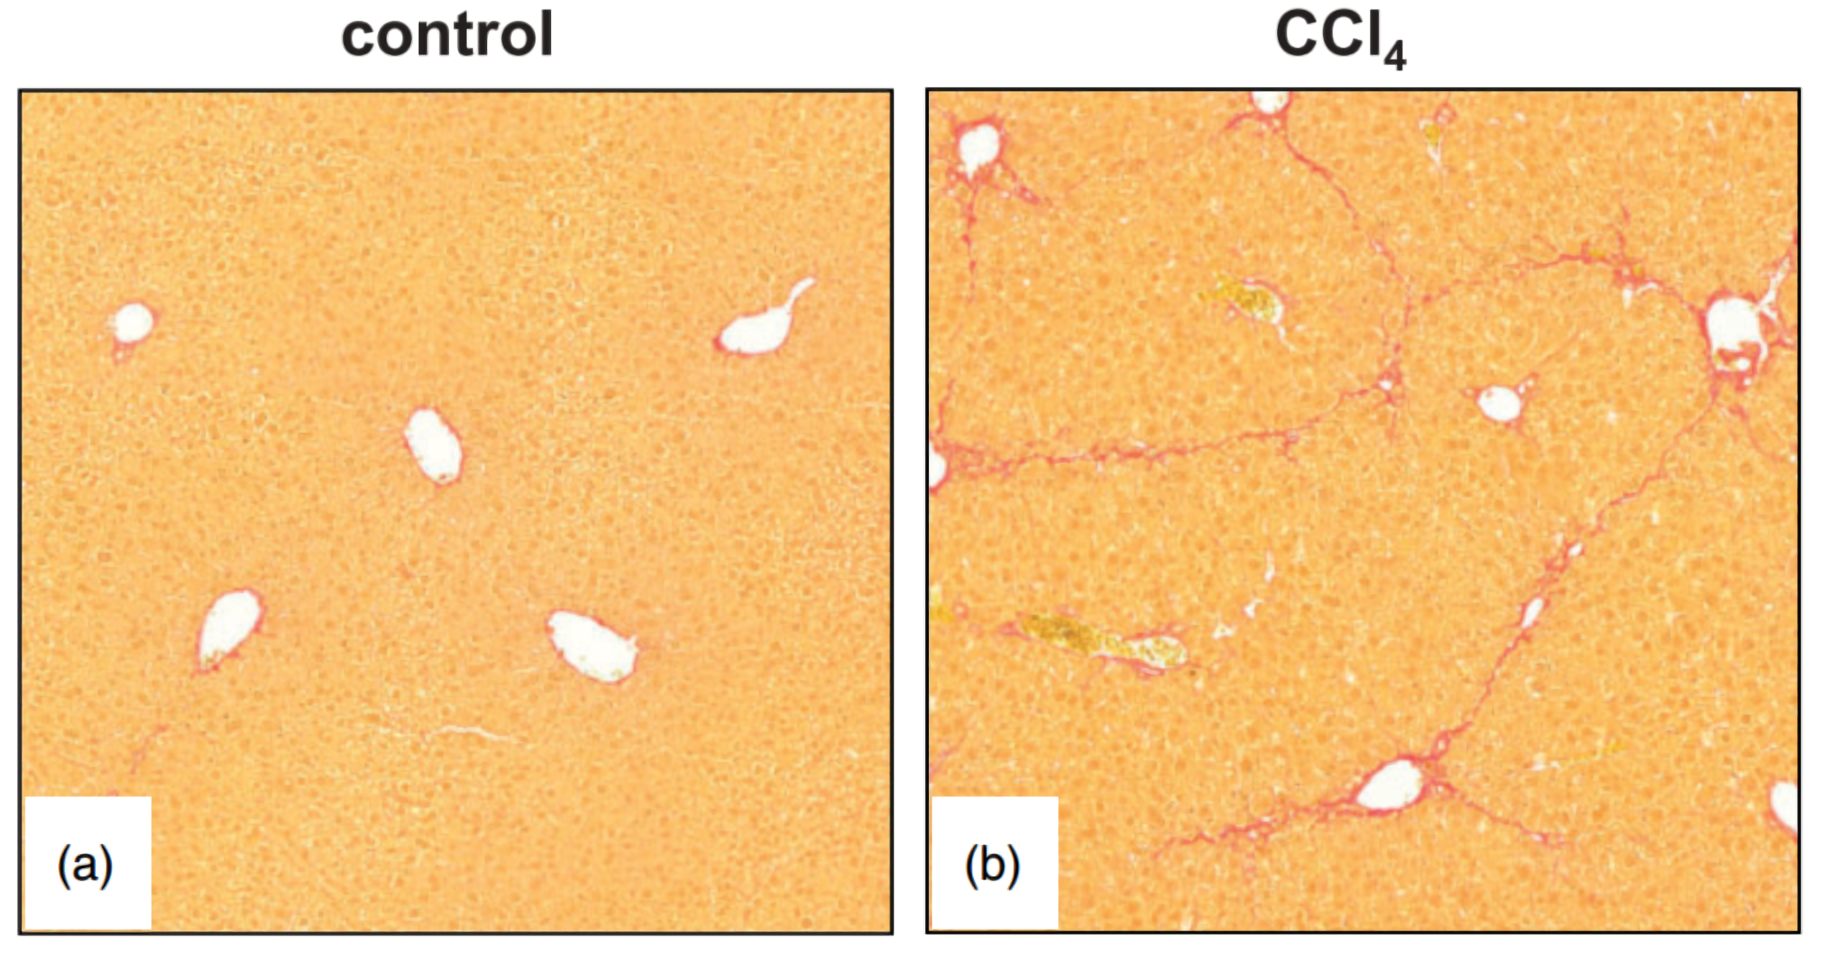 Carbon Tetrachloride (CCl4)-Induced Rodent Hepatic Injury Model